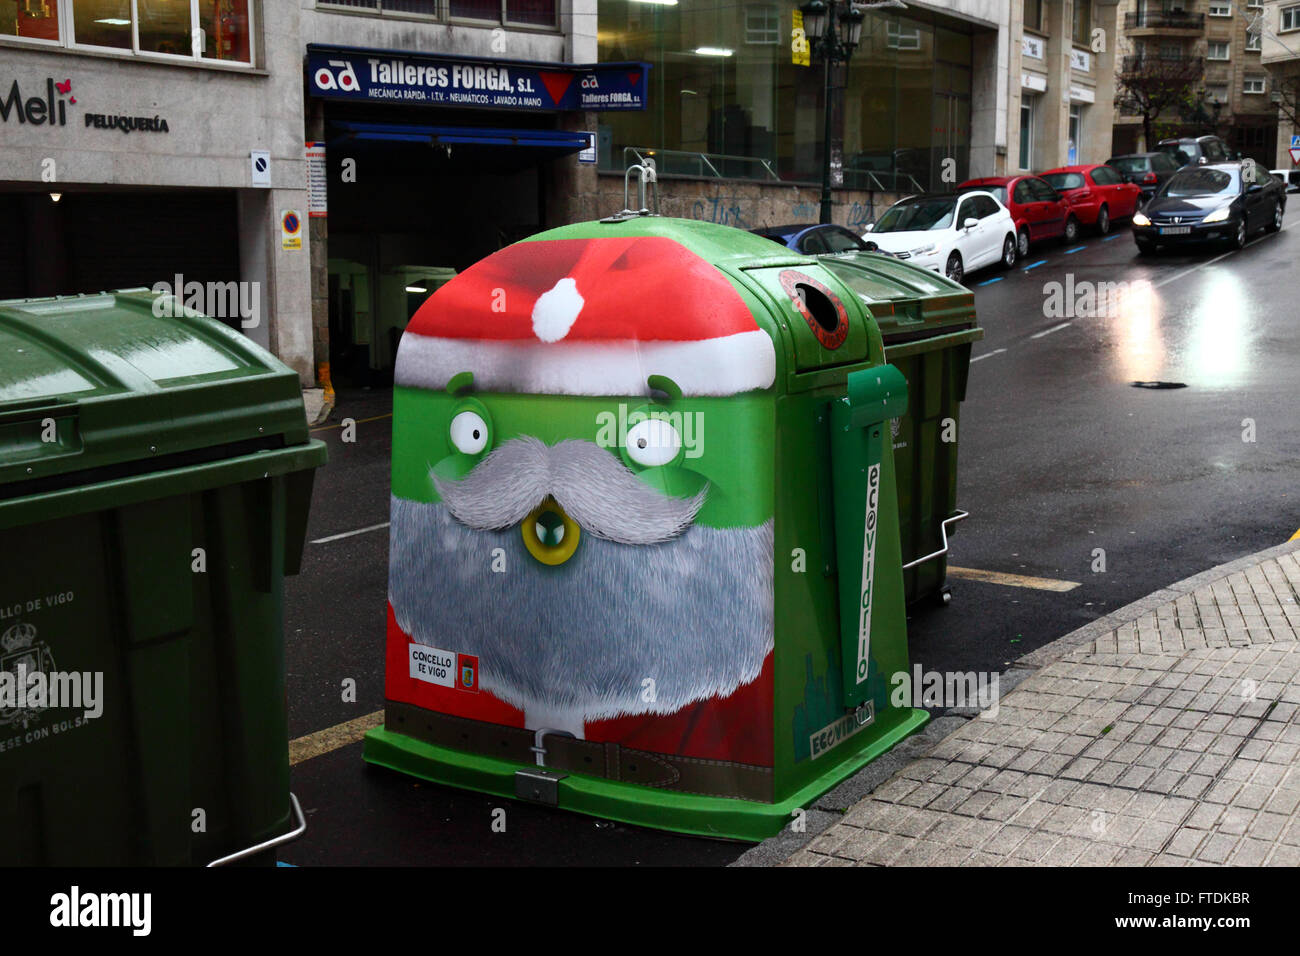 Recycling bin for glass with figure of Father Christmas on it, Vigo, Galicia, Spain Stock Photo